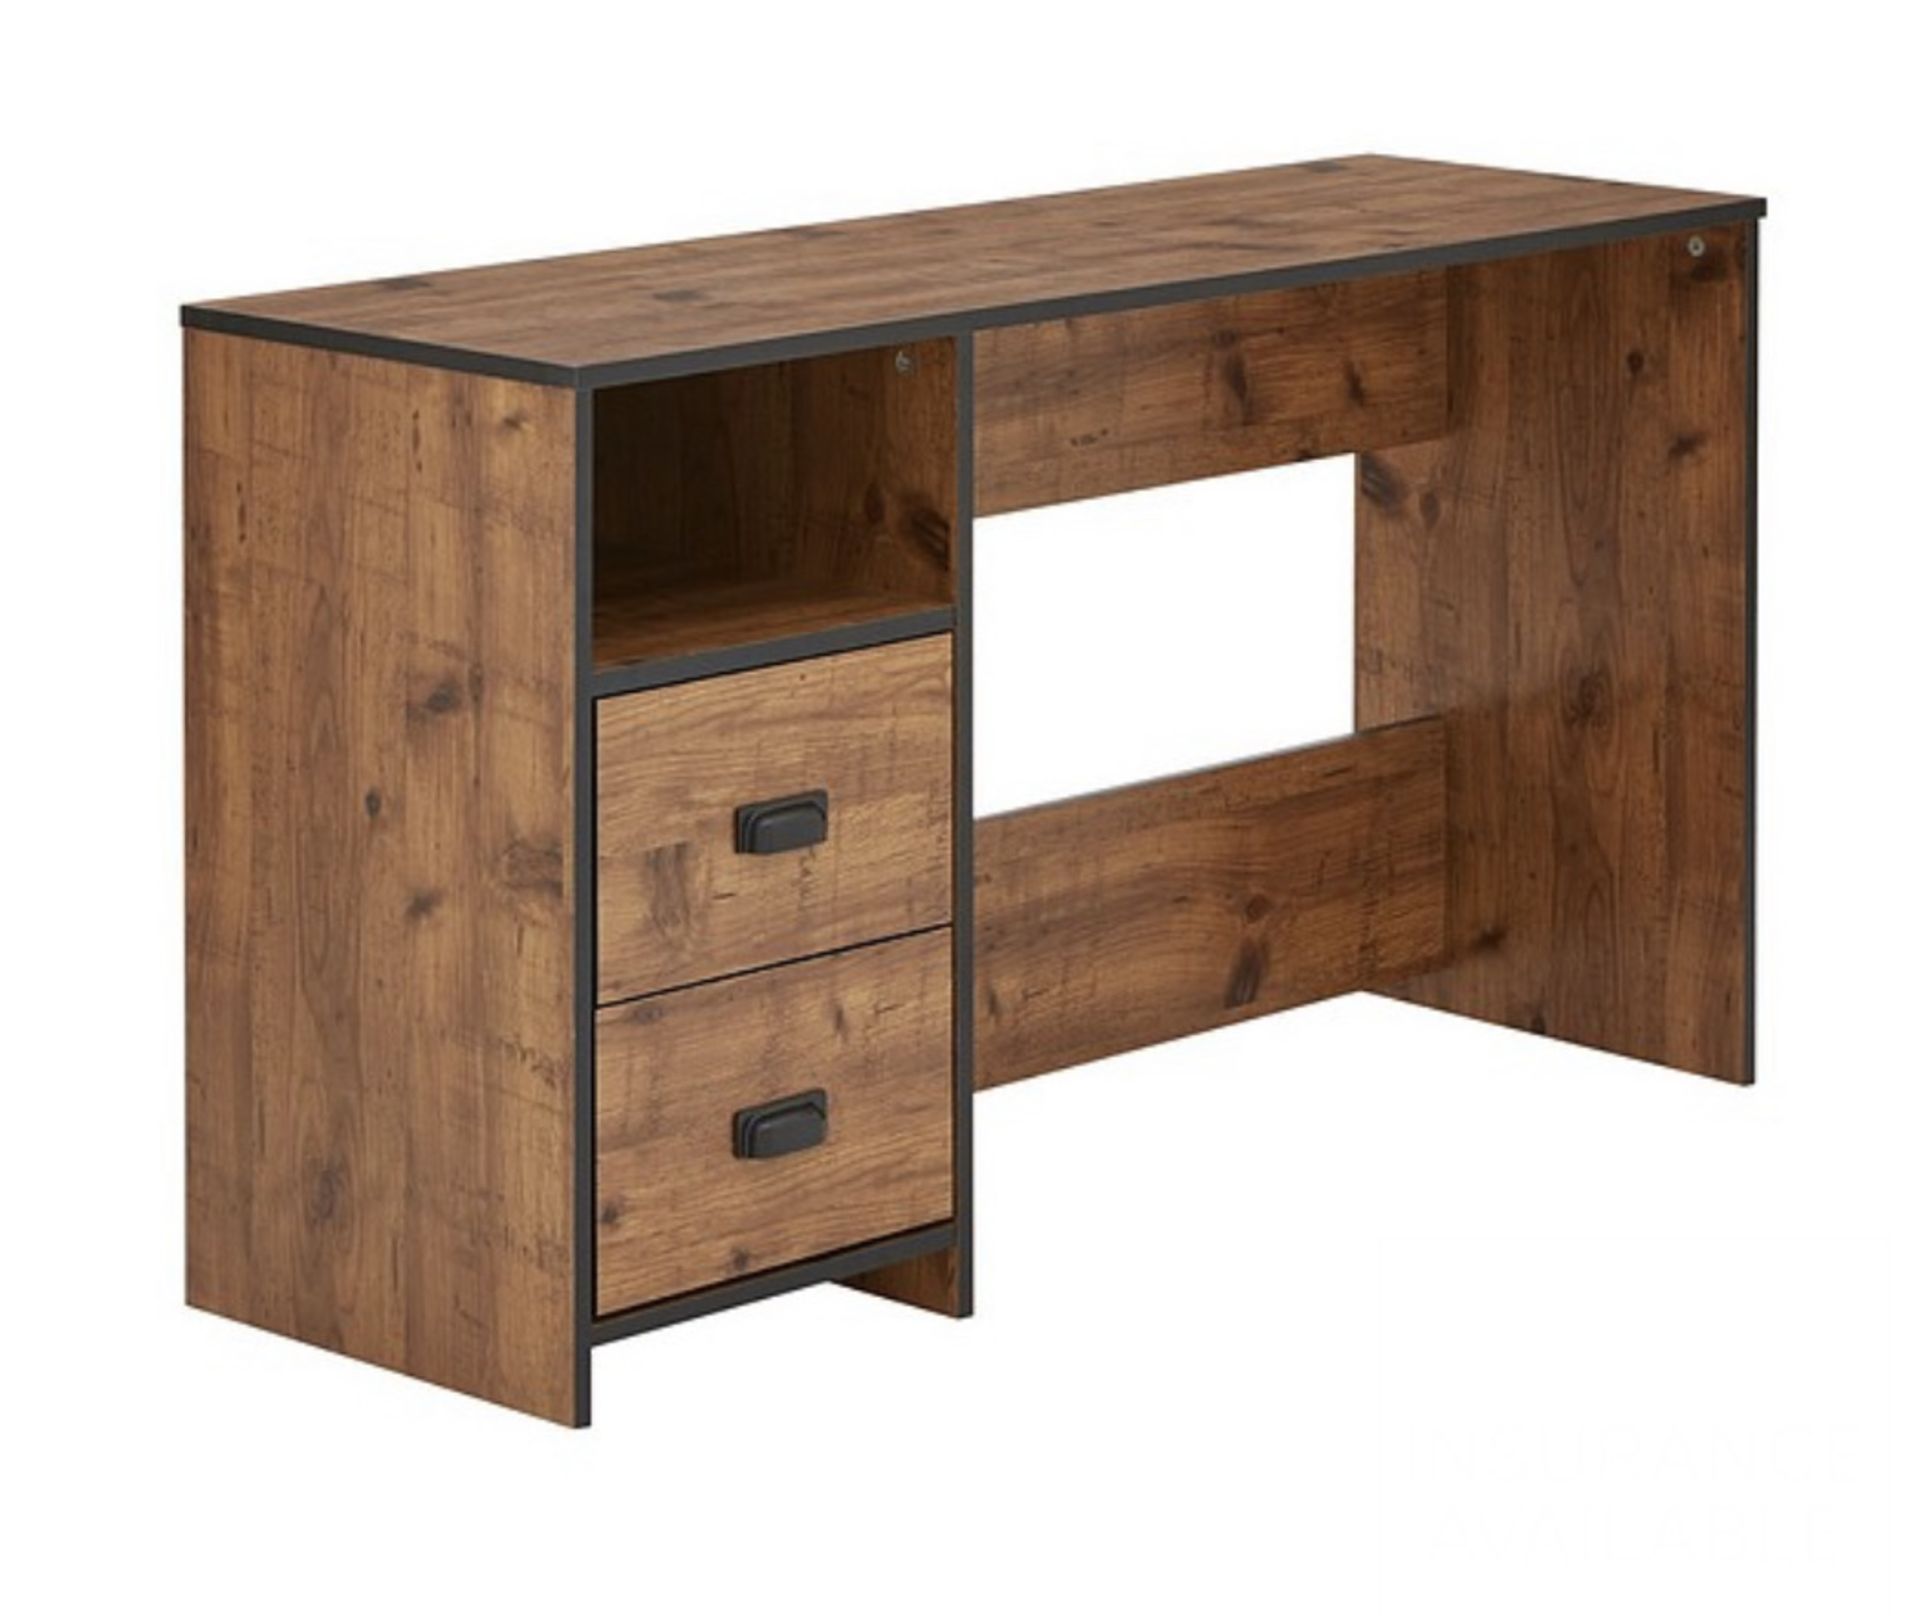 JACKSON 2 DRAWERS DESK IN PINE - RRP £99 - Image 2 of 2